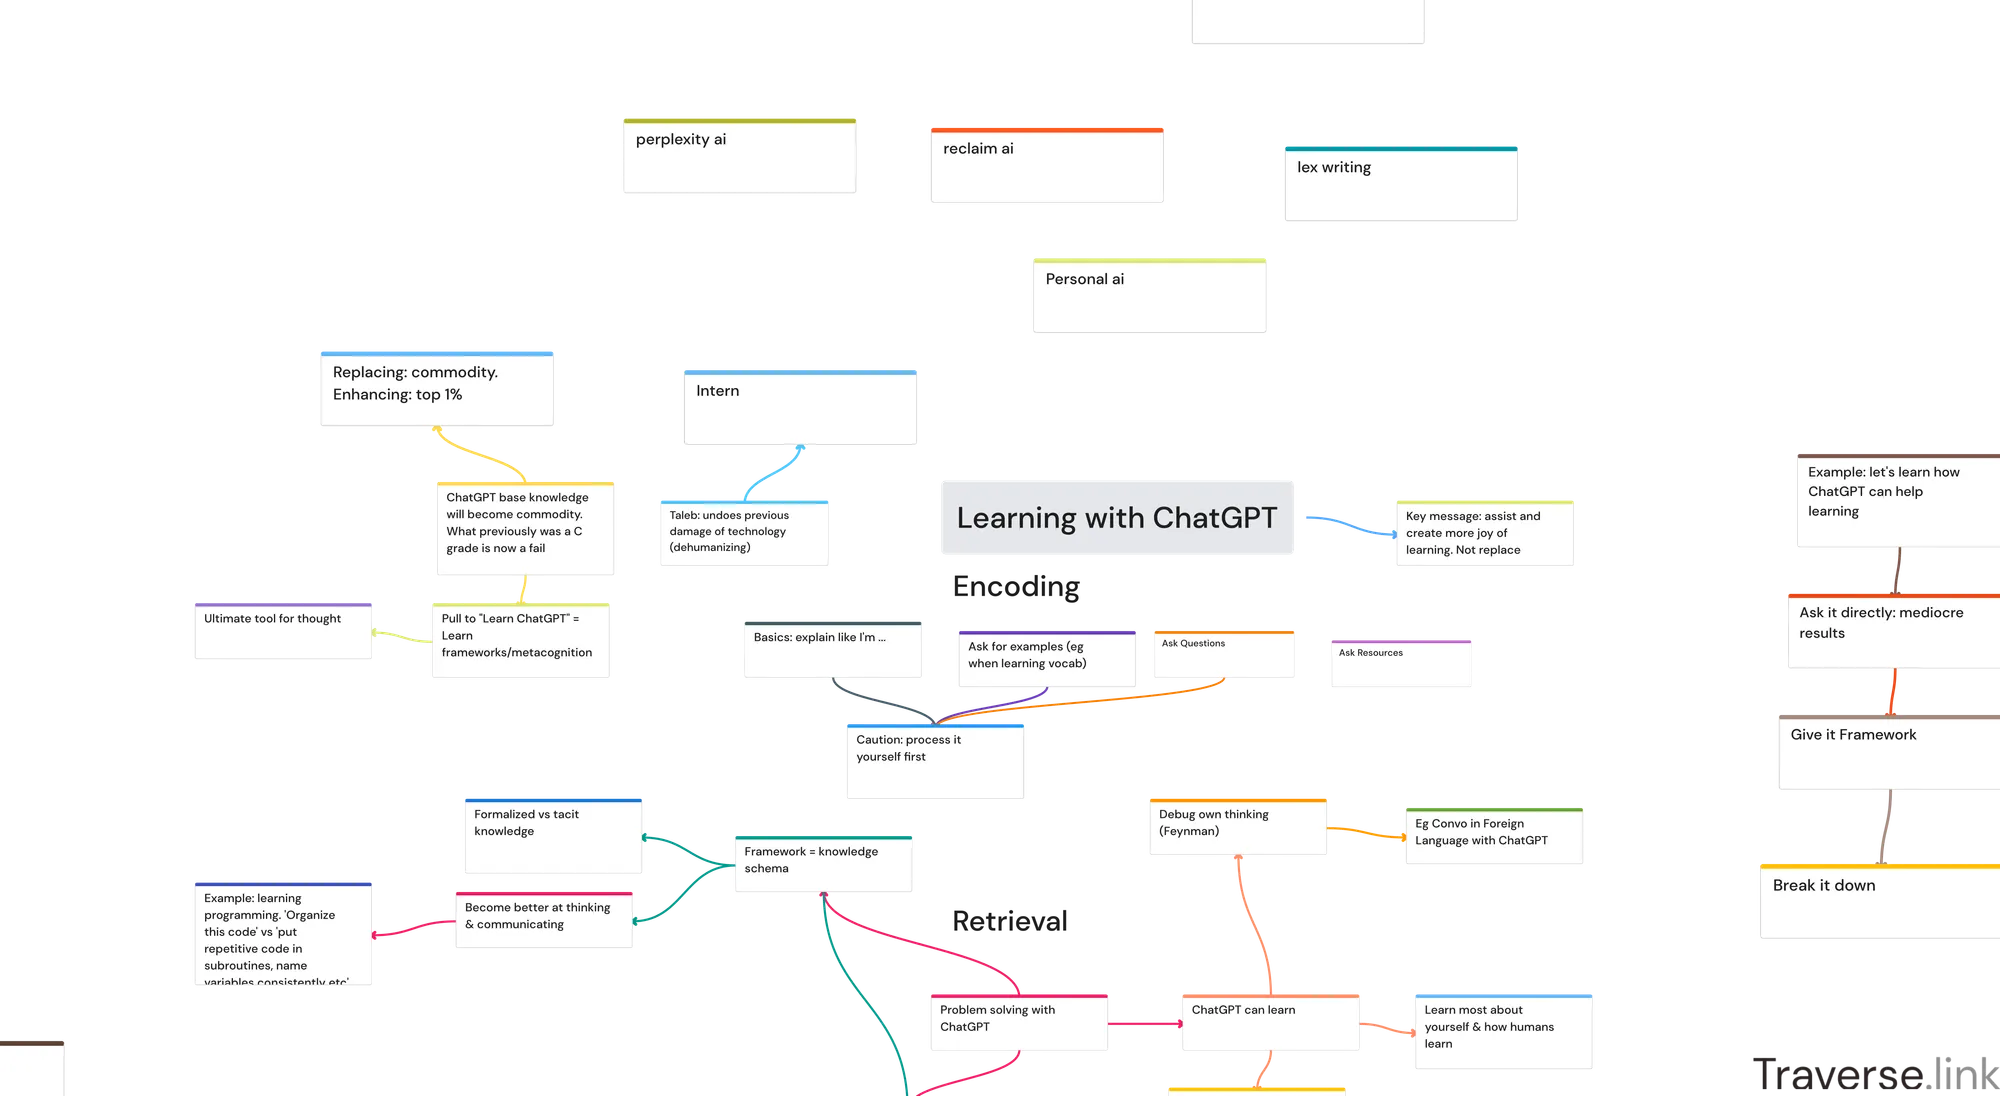 How ChatGPT can help with learning